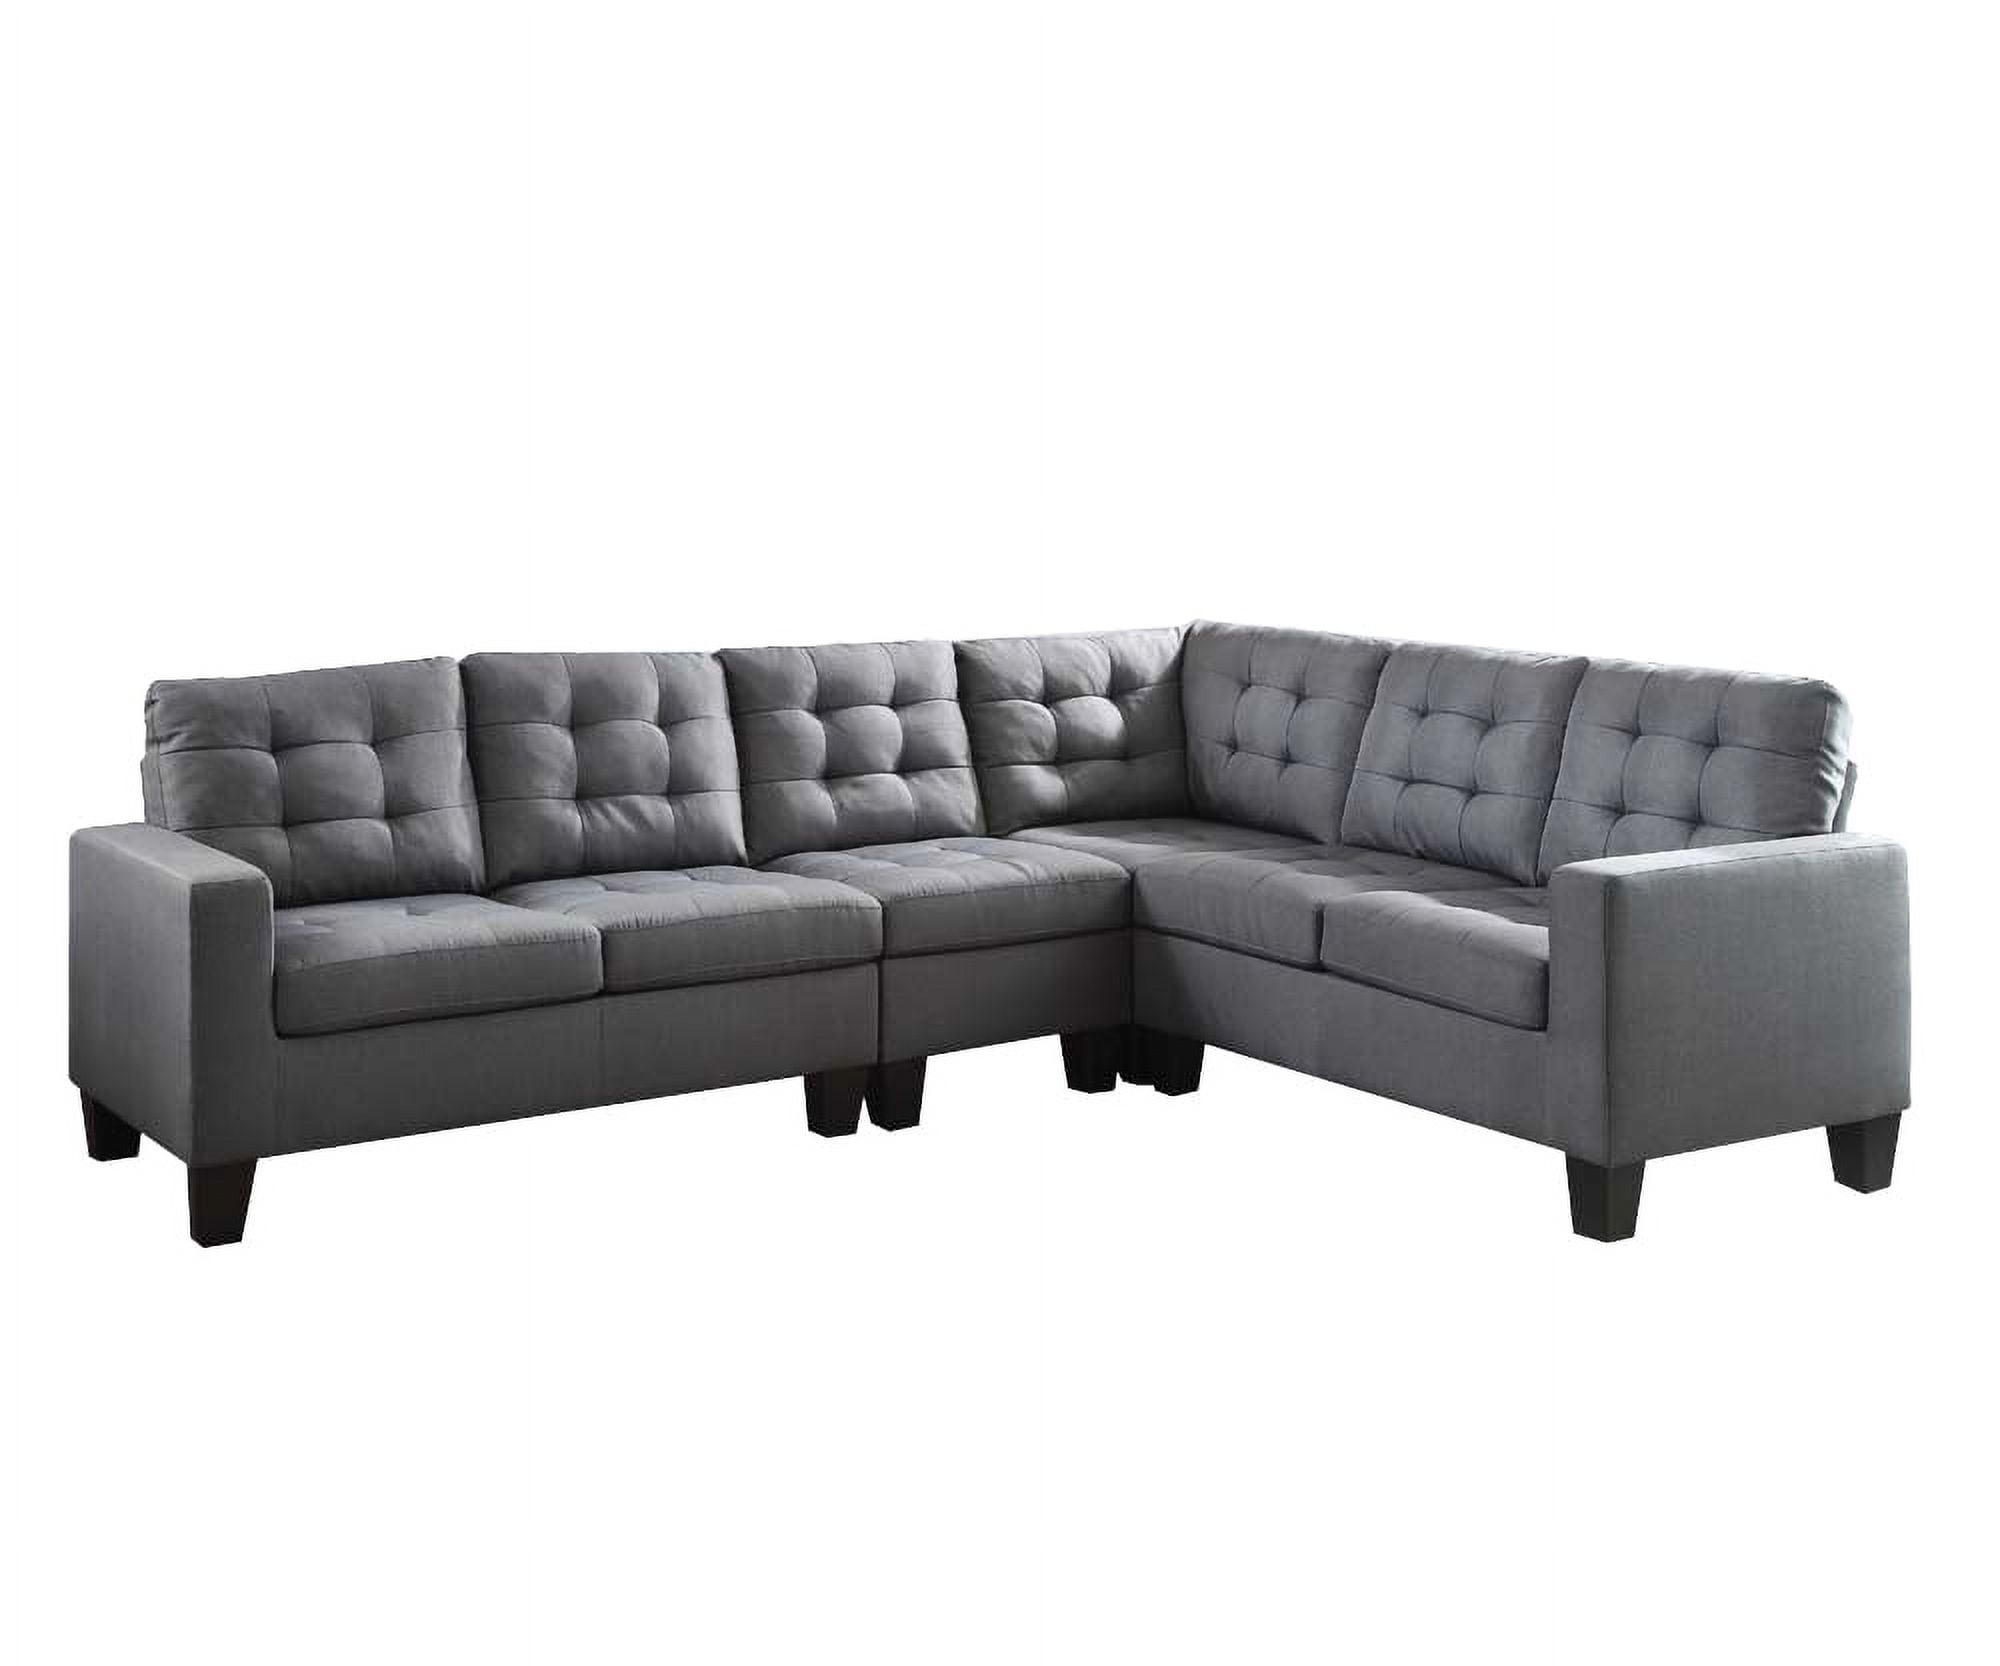 Picture of ACME 52760 2 Piece Earsom Sectional Sofa - Gray Linen - 35 x 107 x 84 in.